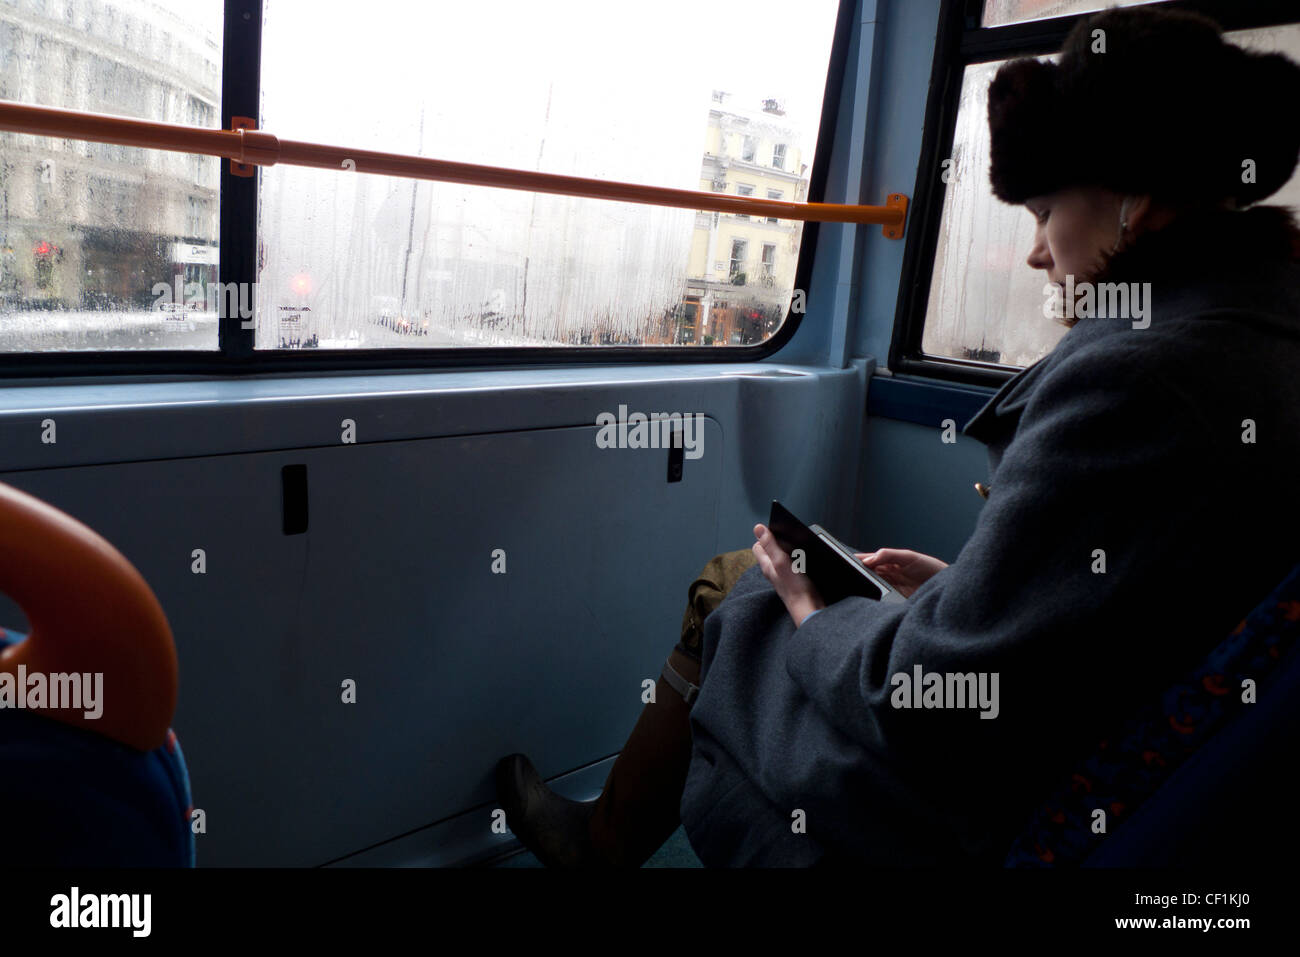 A fashionable young woman wearing a fur hat reading a Kindle electronic book sitting at the top front window of a double-decker bus  in London UK Stock Photo